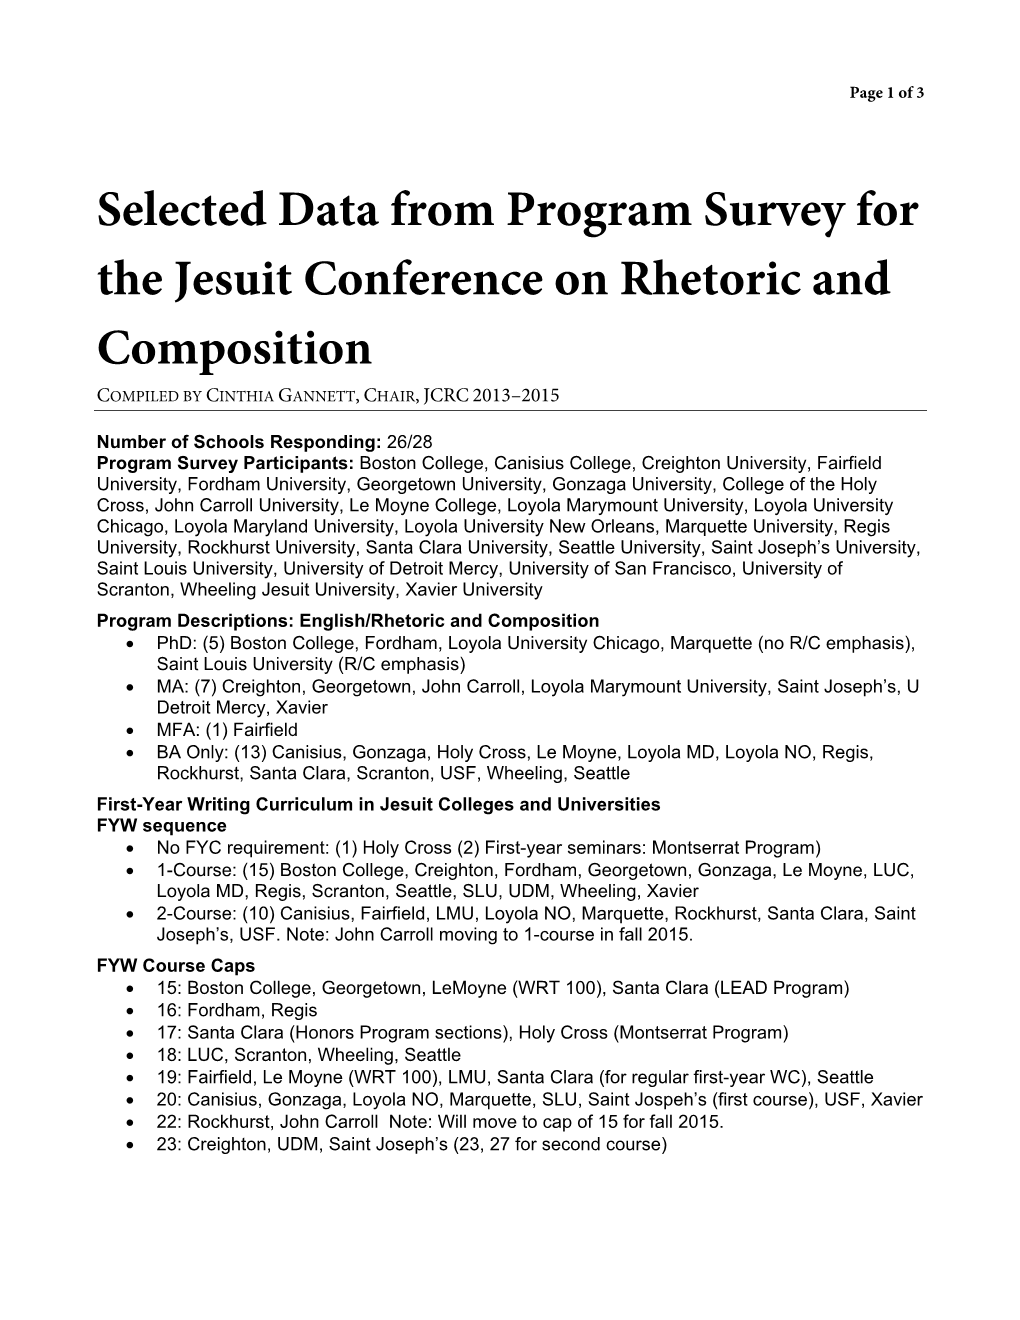 Selected Data from Program Survey for the Jesuit Conference on Rhetoric and Composition COMPILED by CINTHIA GANNETT, CHAIR, JCRC 2013–2015